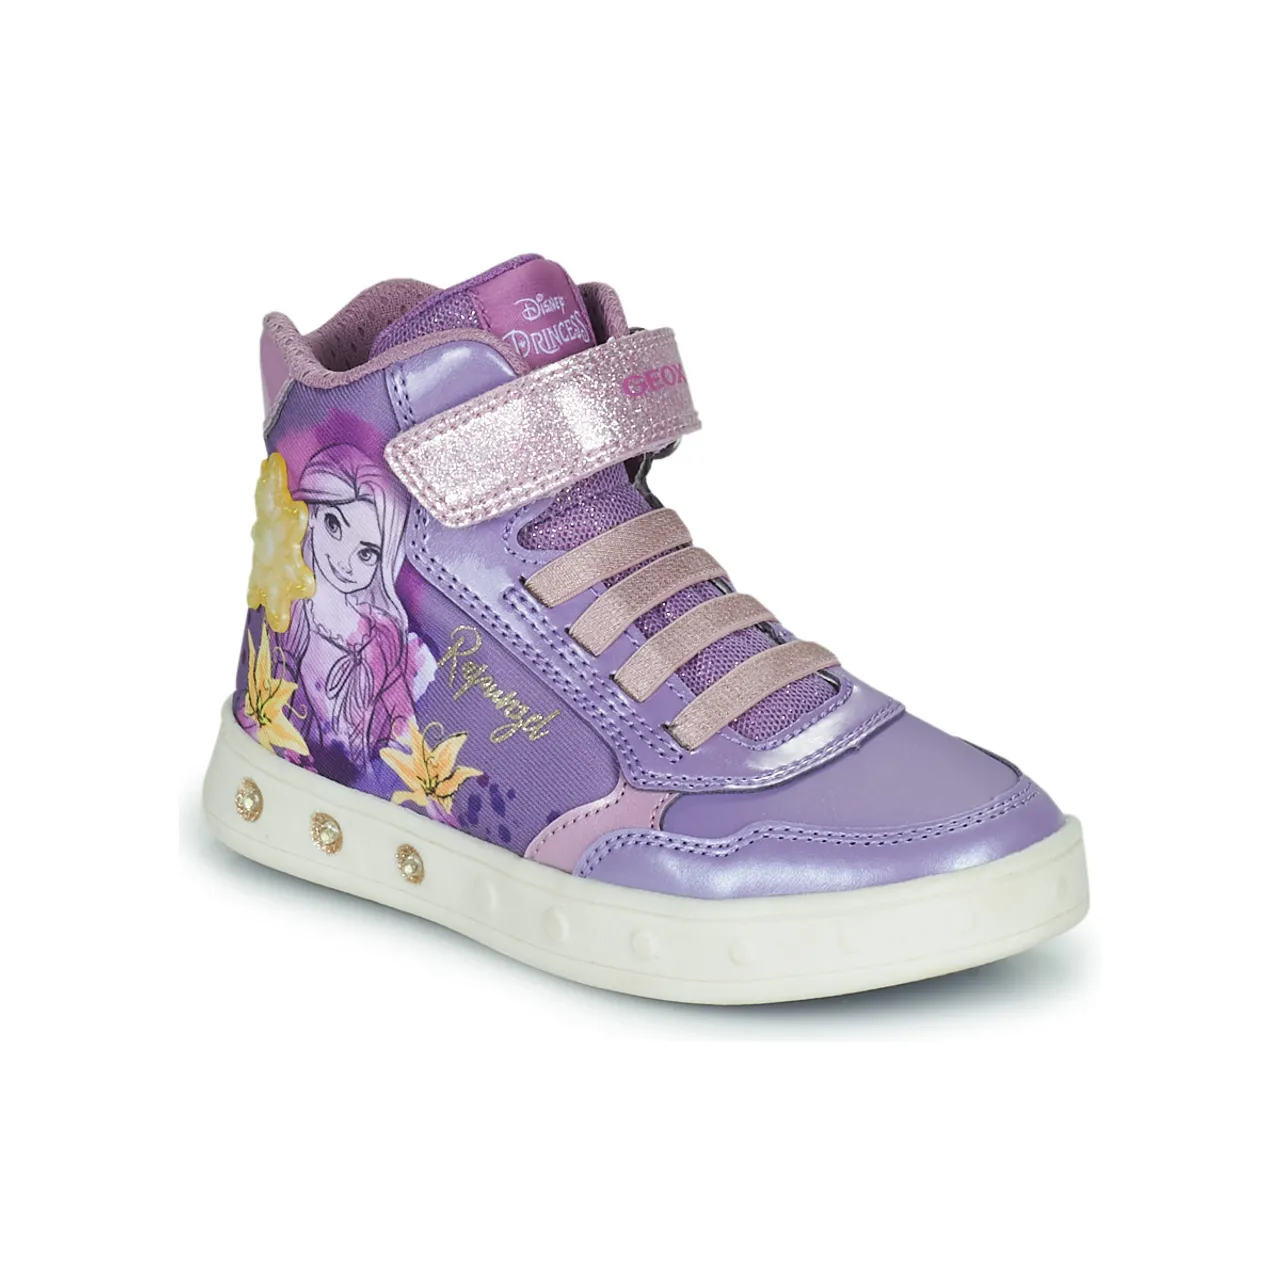 Geox  J SKYLIN GIRL G  girls's Children's Shoes (High-top Trainers) in Purple